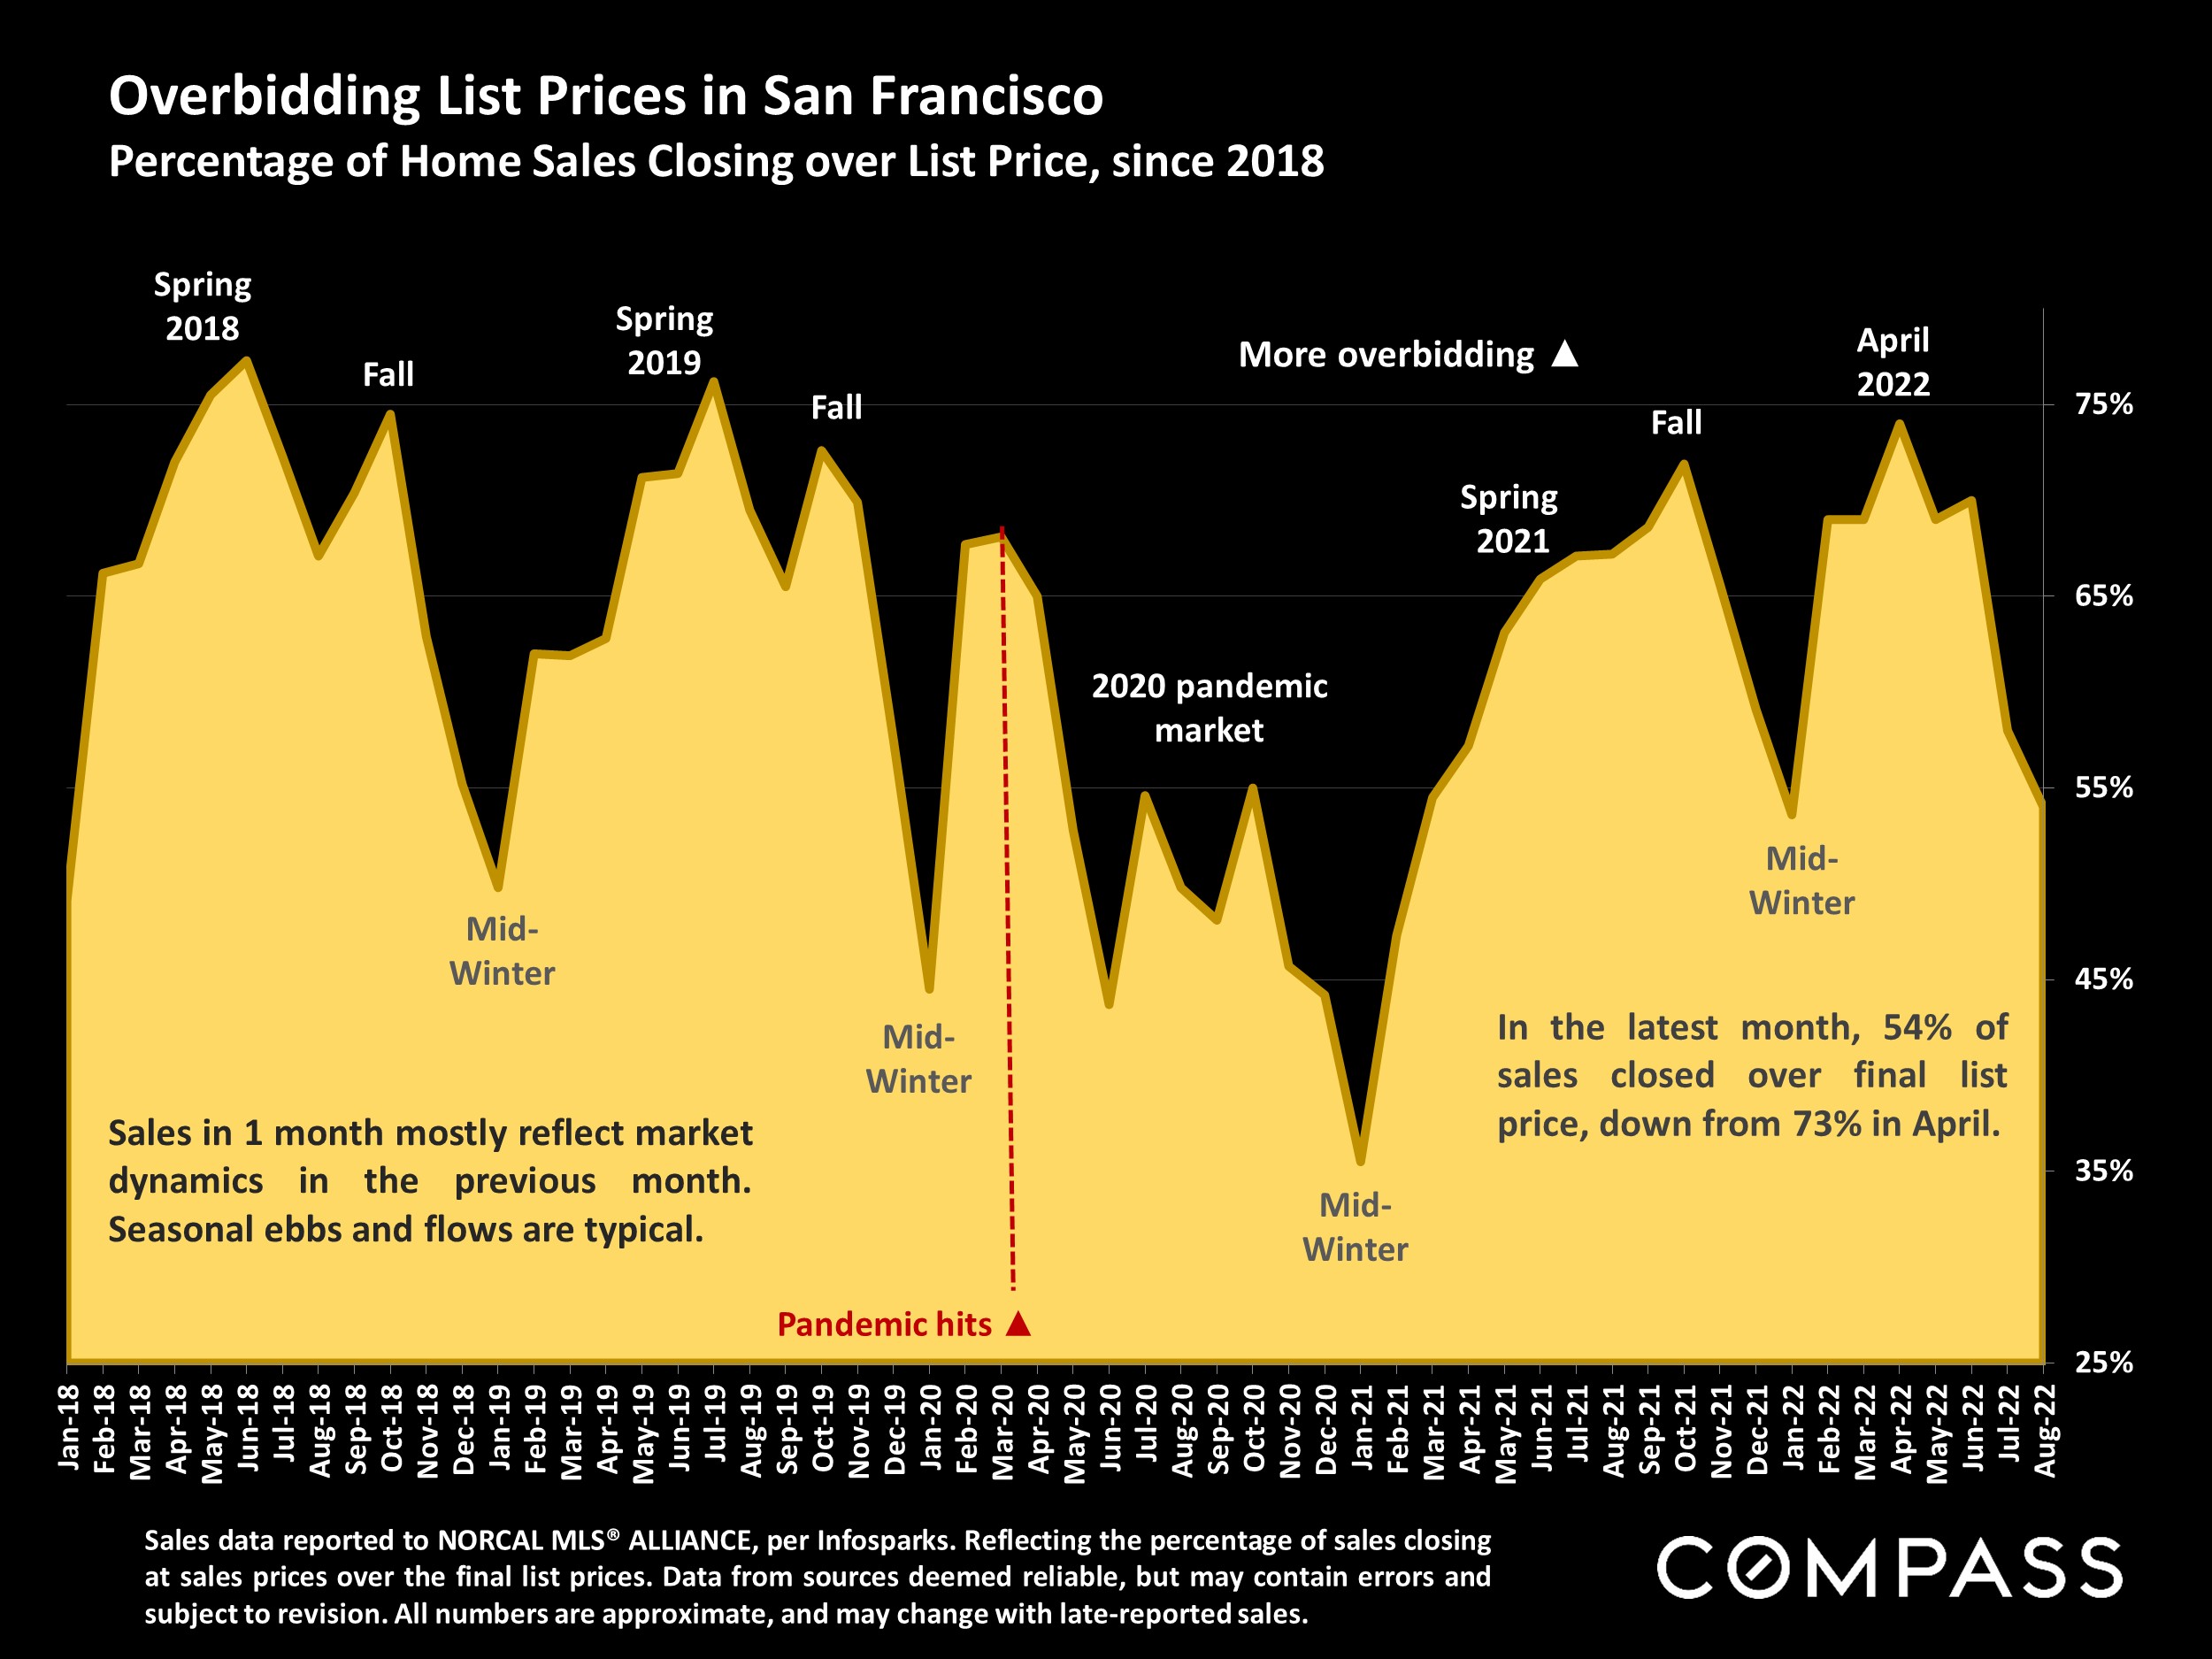 Overbidding List Prices in San Francisco